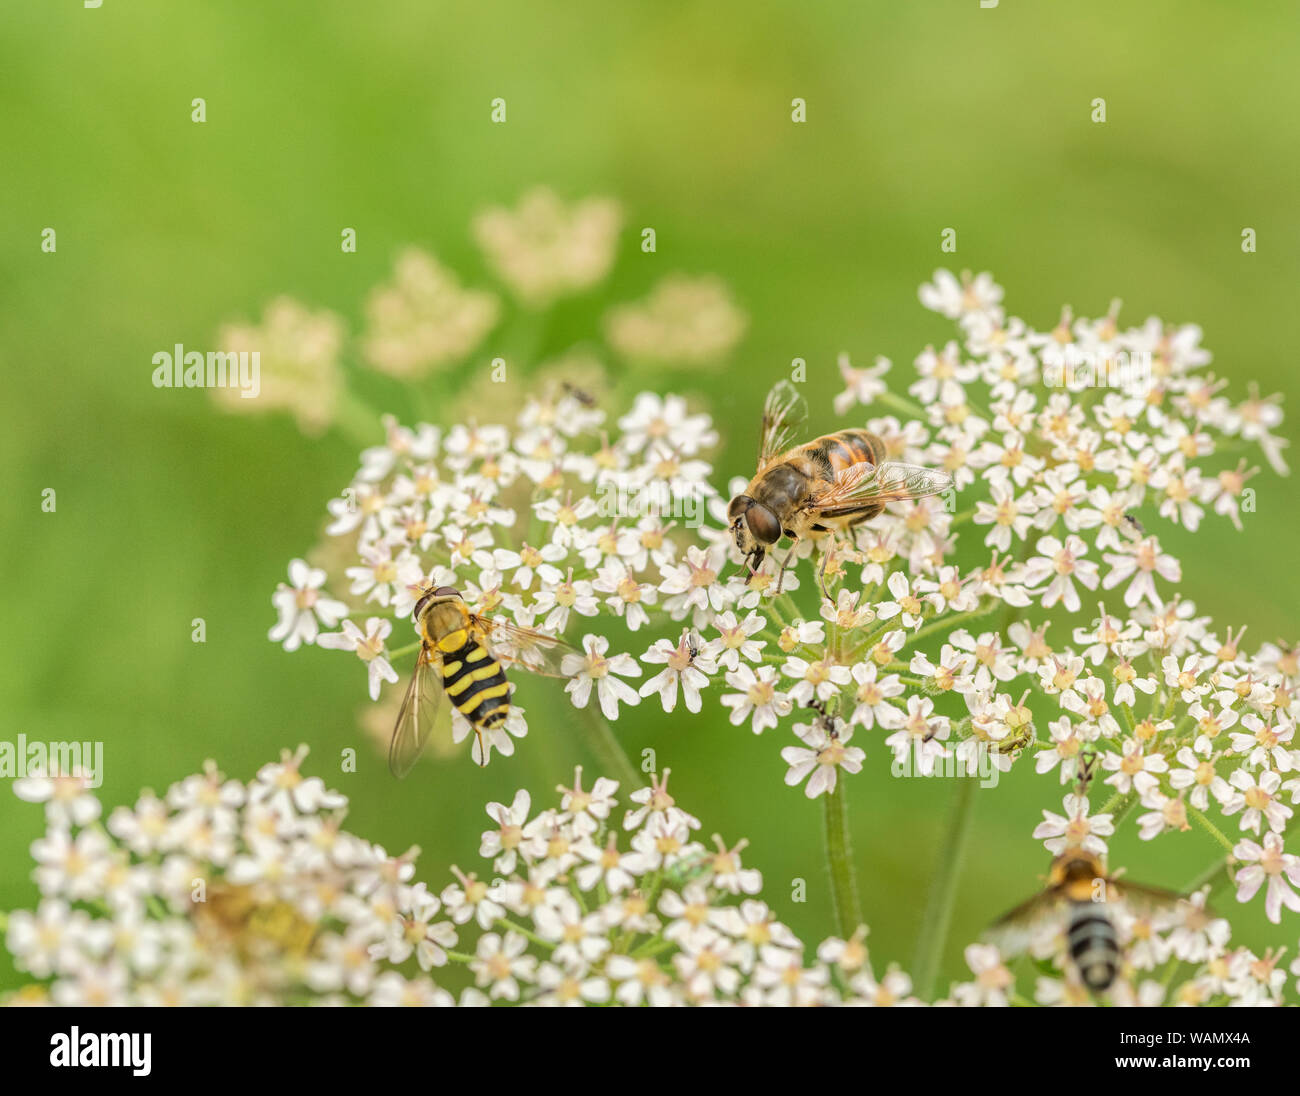 Bee-like and hoverfly-like insects foraging feeding on Hogweed / Heracleum sphondylium flowers. Insects UK. Cow parsley family. Stock Photo